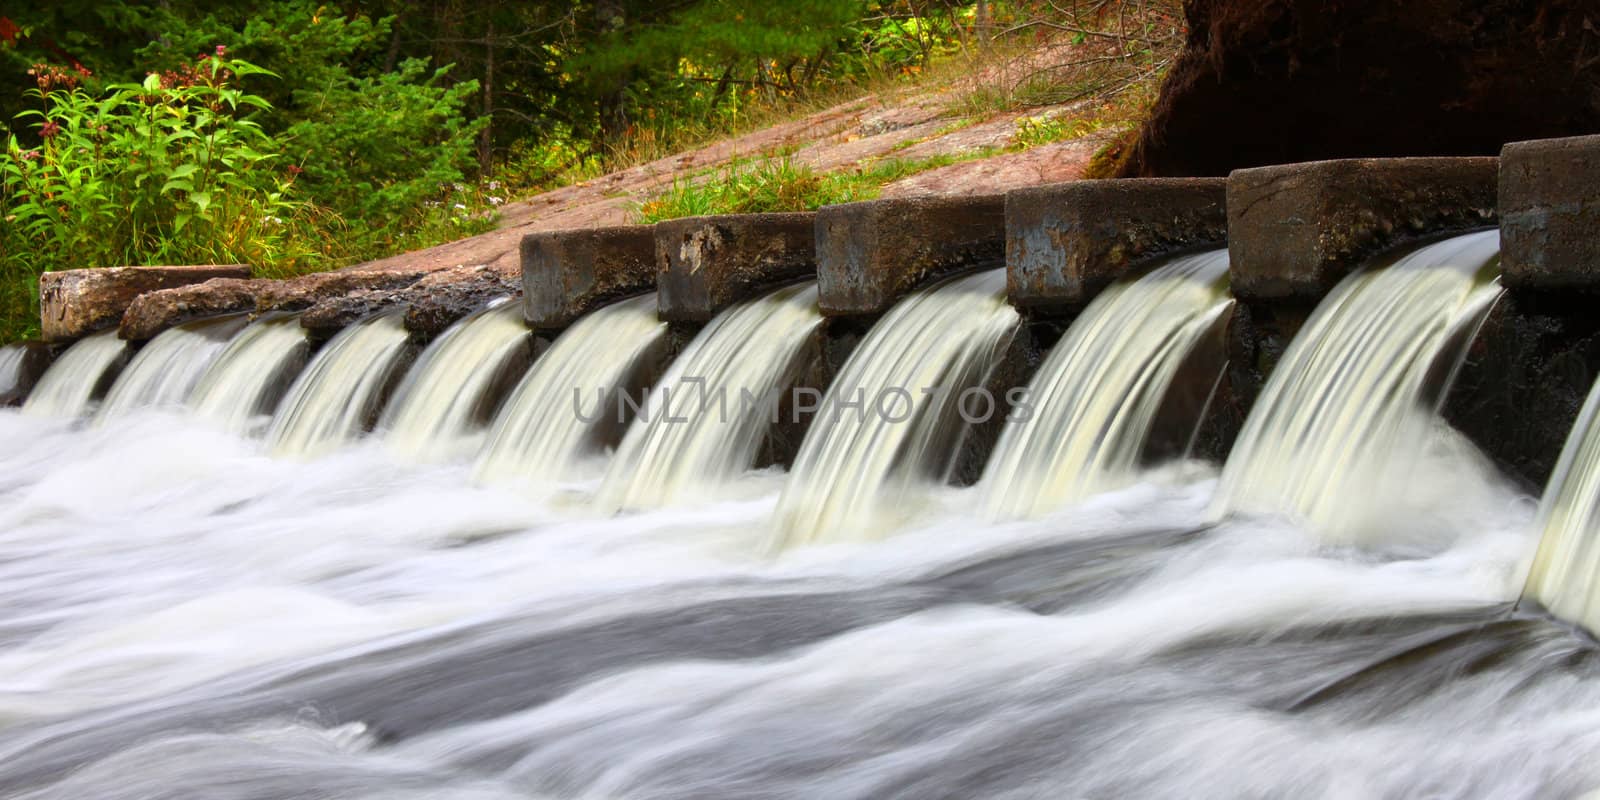 Cascades of water at the Bond Falls Scenic Site in Michigan.